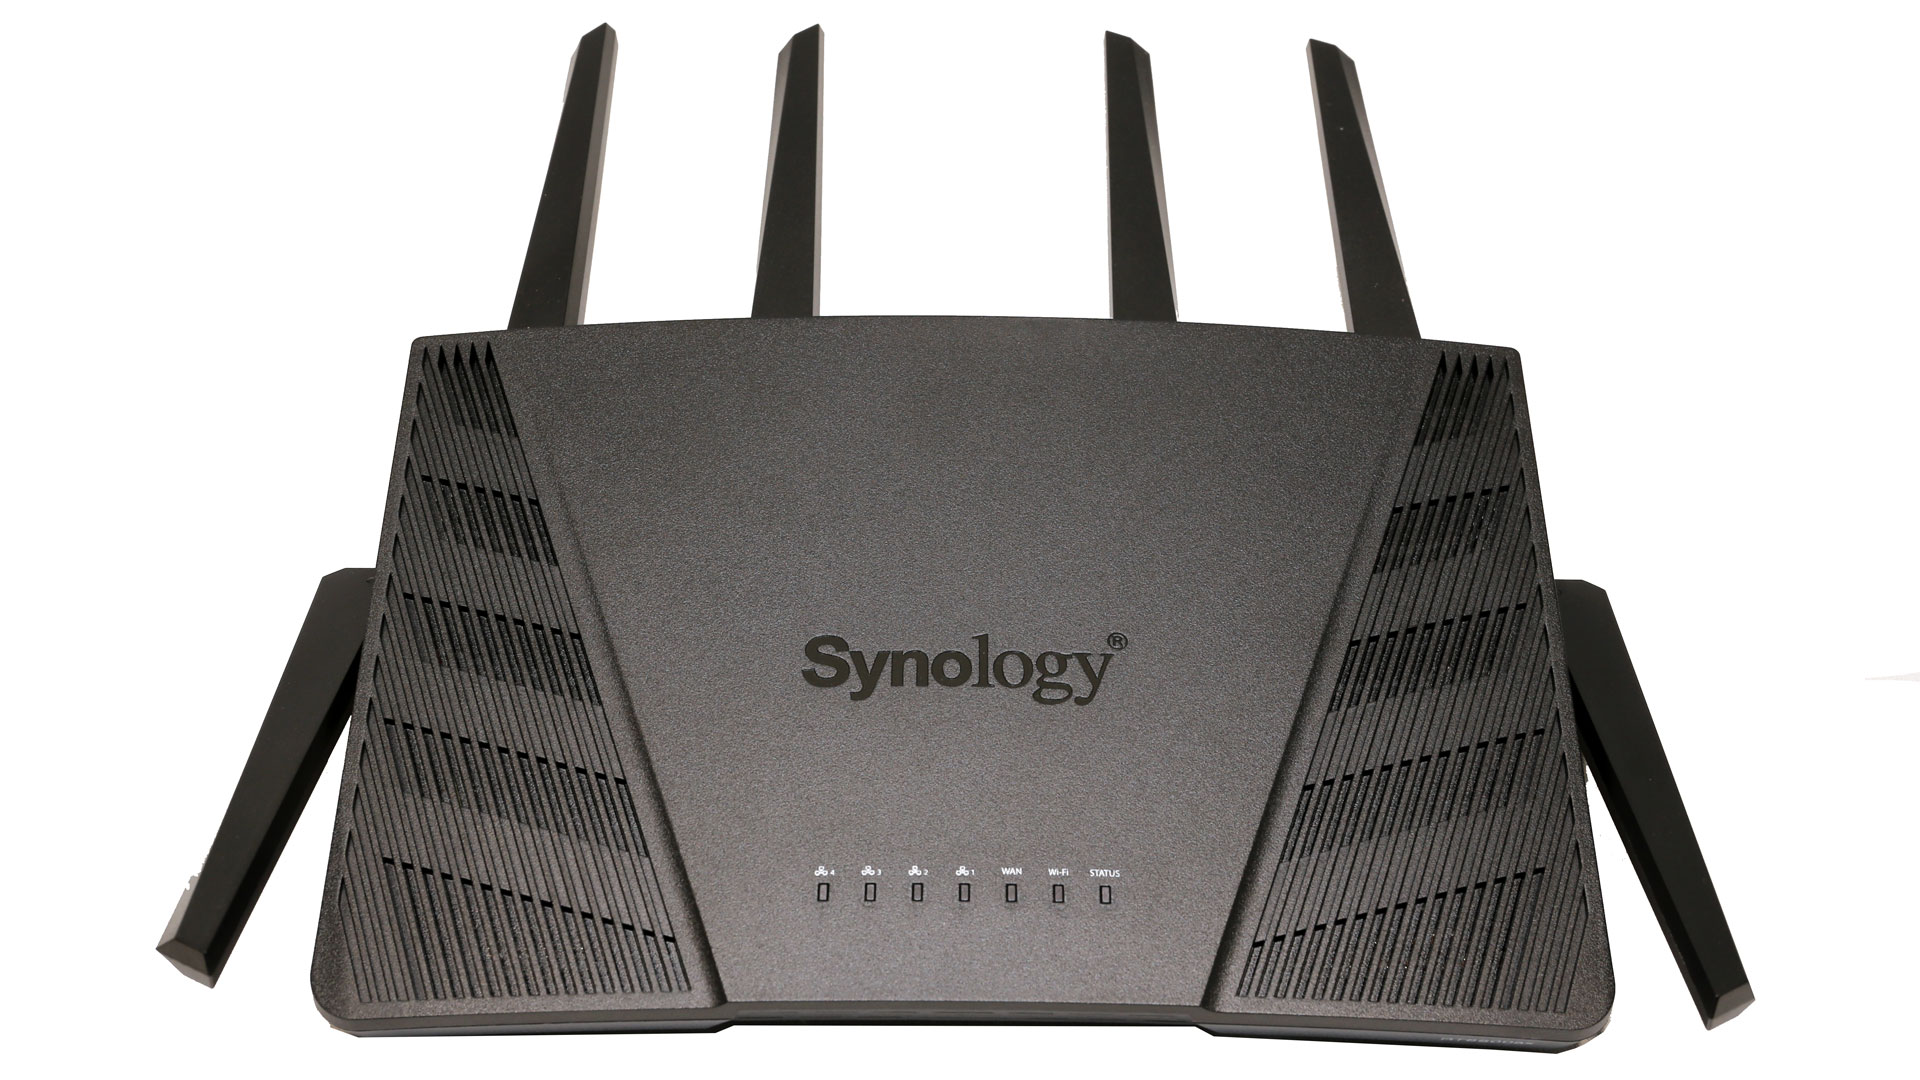 Synology RT6600ax Wireless Router Review - Contents & Bundle